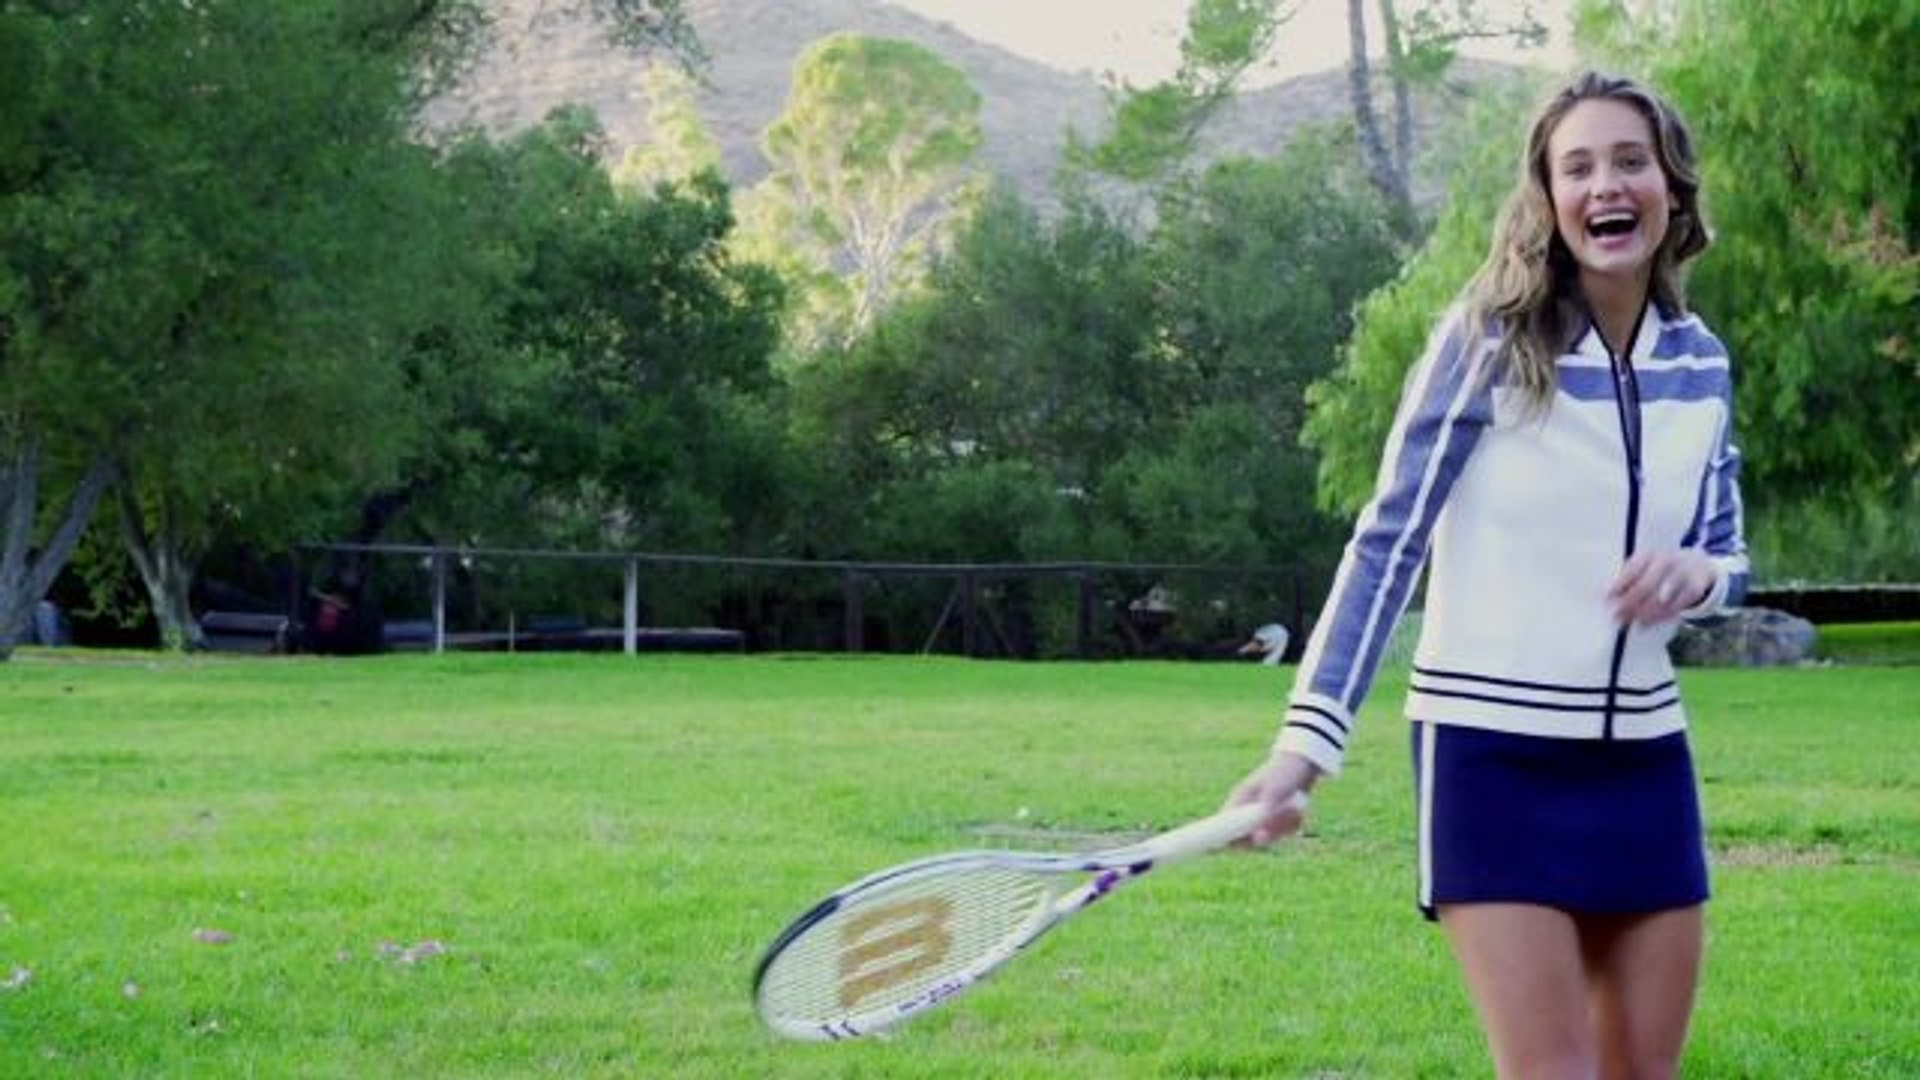 She plays tennis well